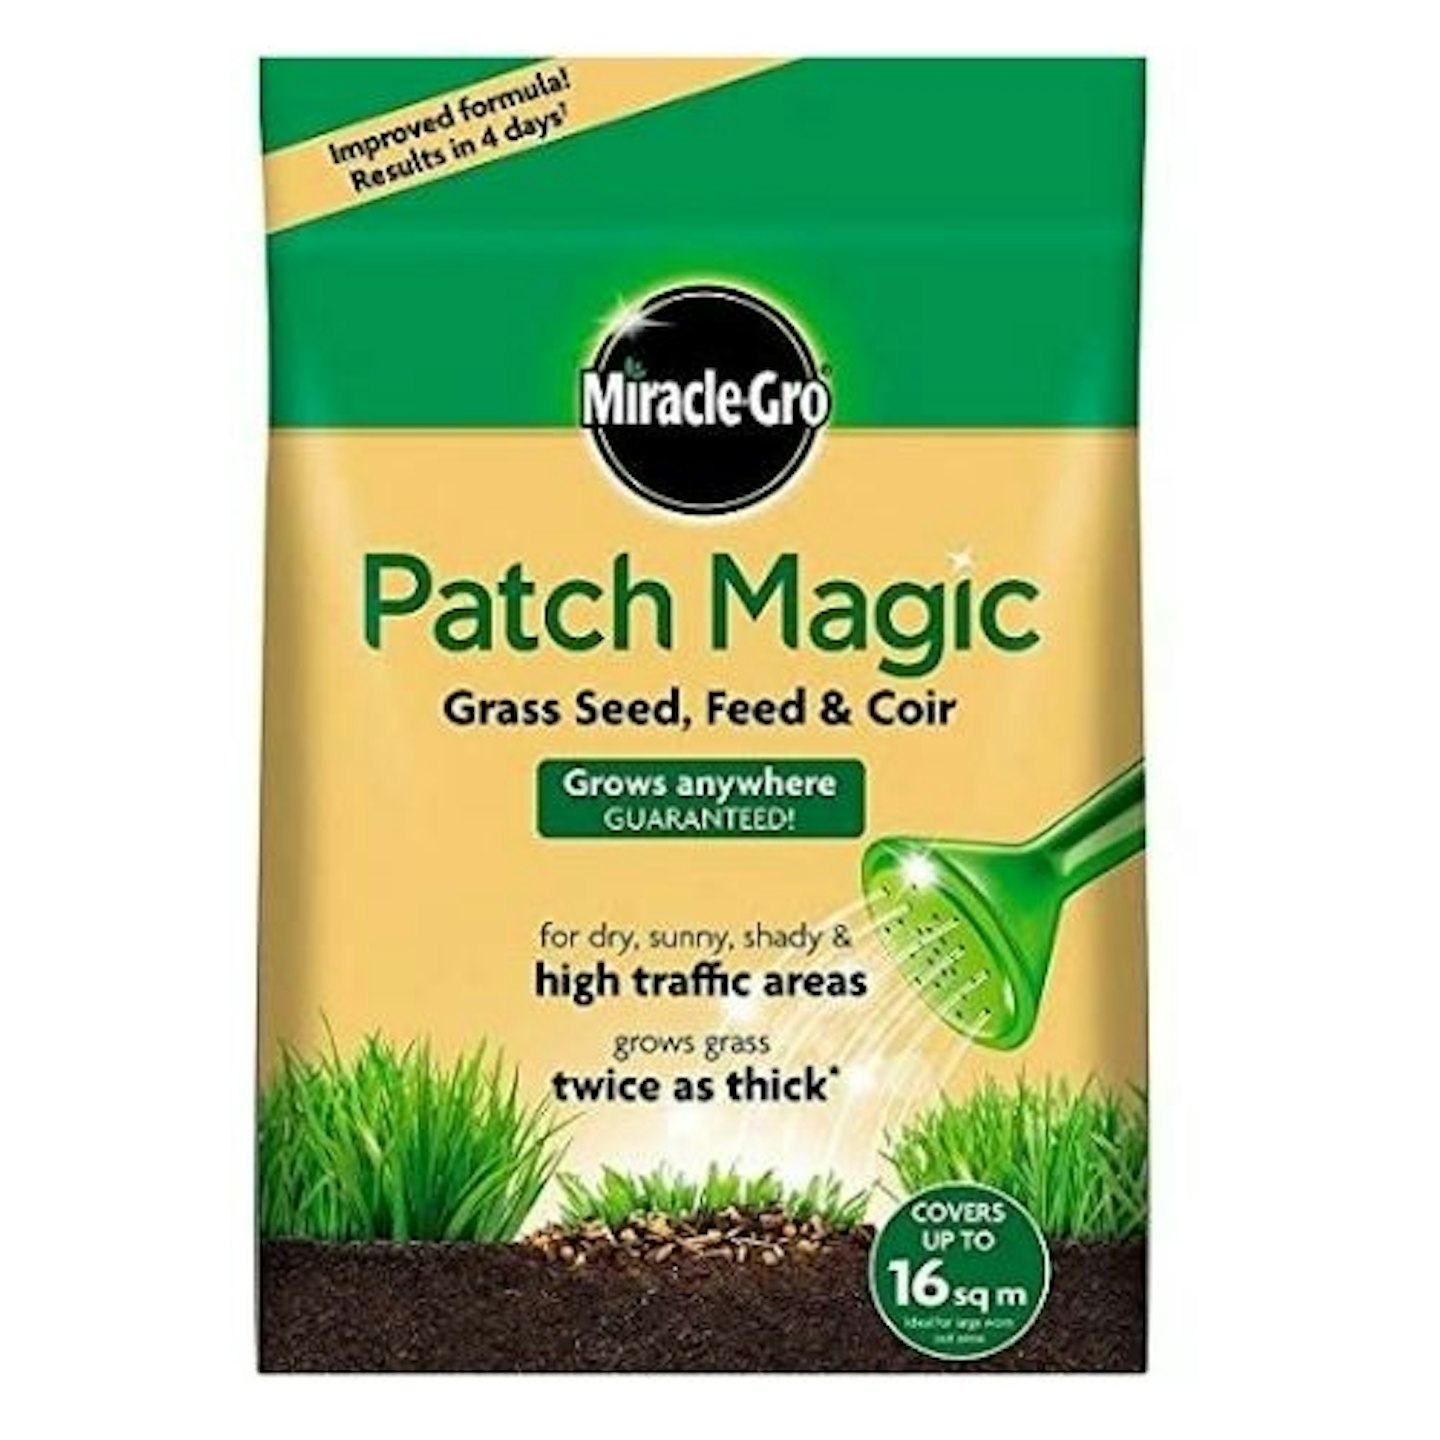 Miracle-Gro Patch Magic Grass Seed